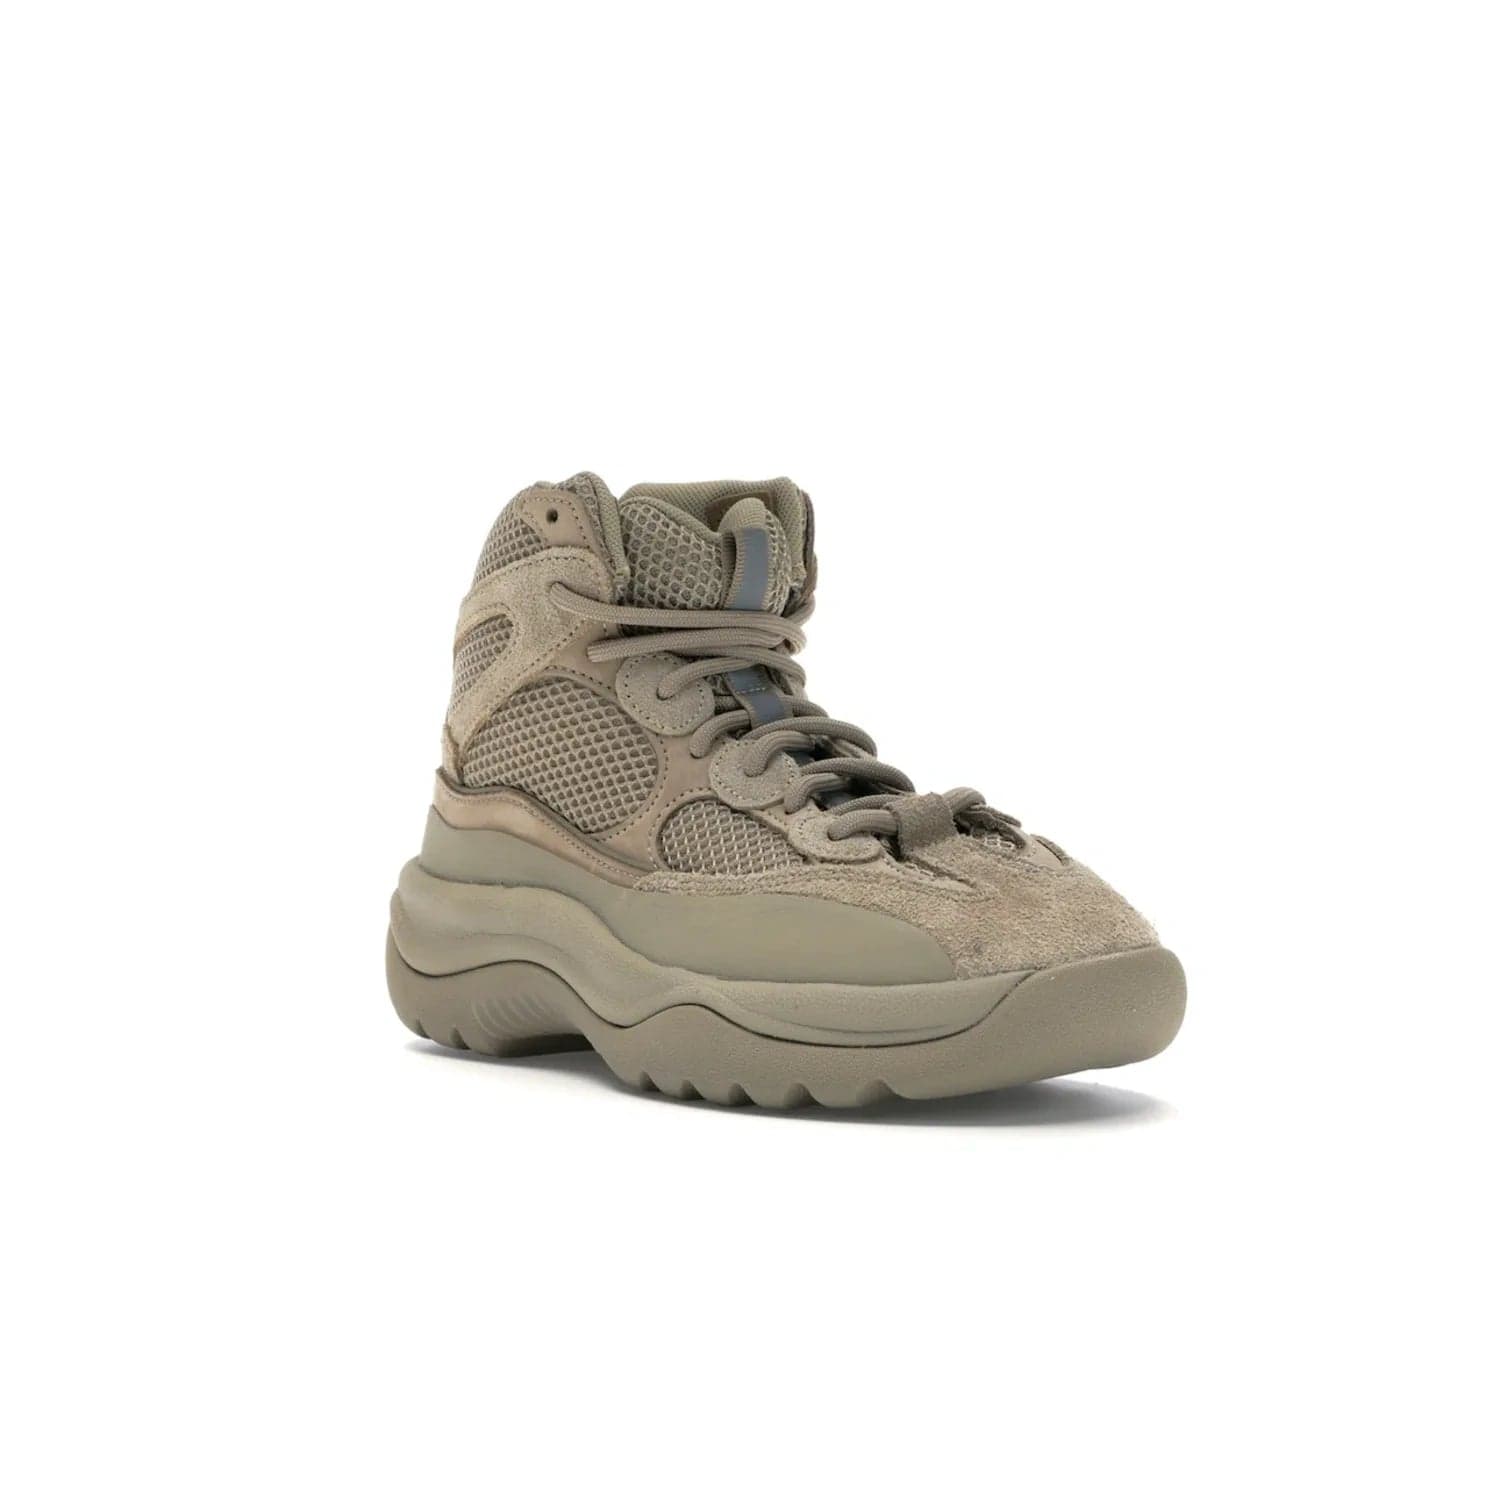 adidas Yeezy Desert Boot Rock - Image 6 - Only at www.BallersClubKickz.com - #
This season, make a fashion statement with the adidas Yeezy Desert Boot Rock. Nubuck and suede upper offers tonal style while the grooved sole provides traction and stability. Get yours in April 2019.